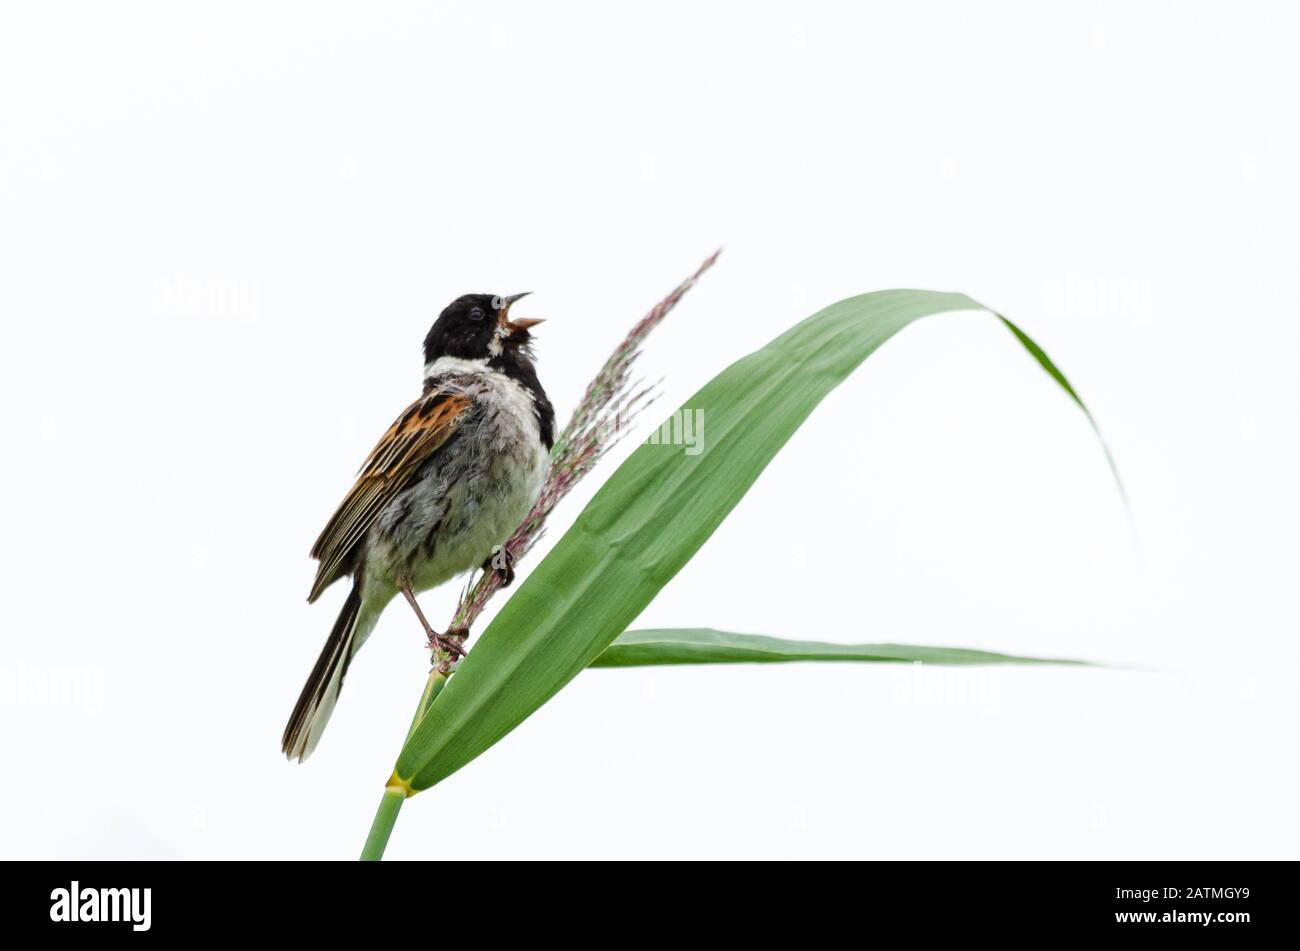 Common reed bunting (Emberiza schoeniclus) perched on the top of a Phragmites reed Stock Photo